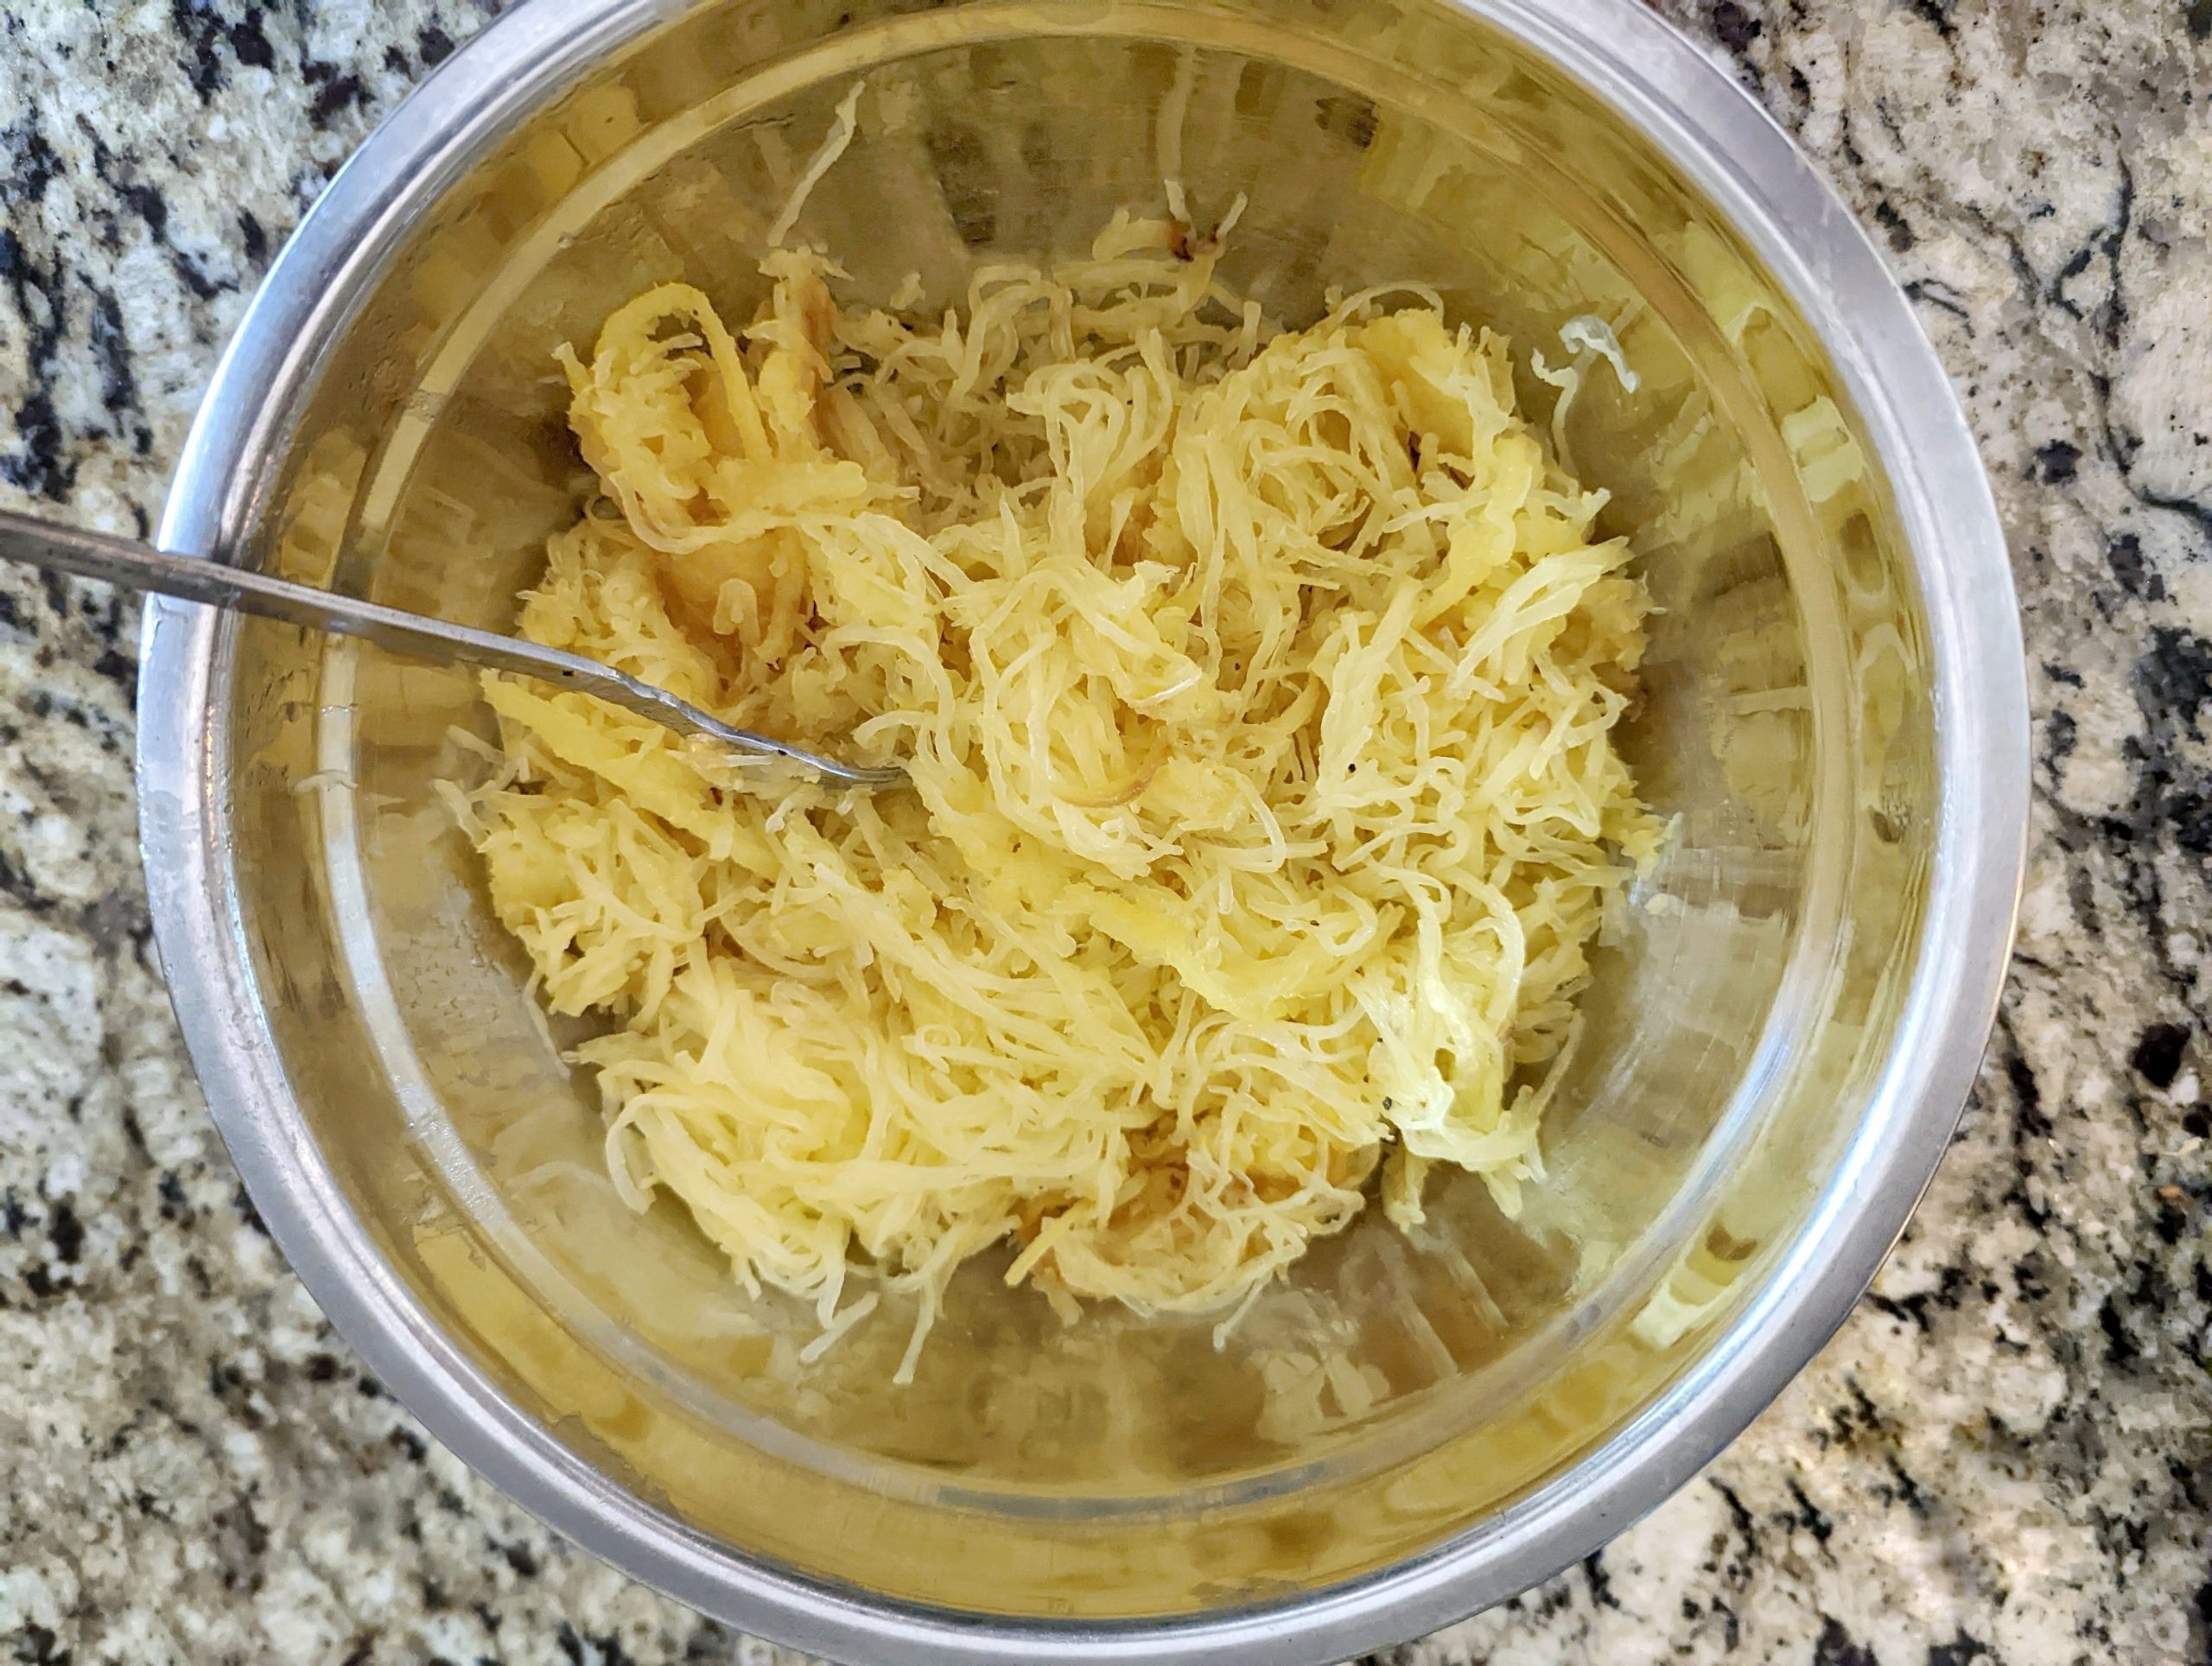 The spaghetti squash pulled and the strands separated.